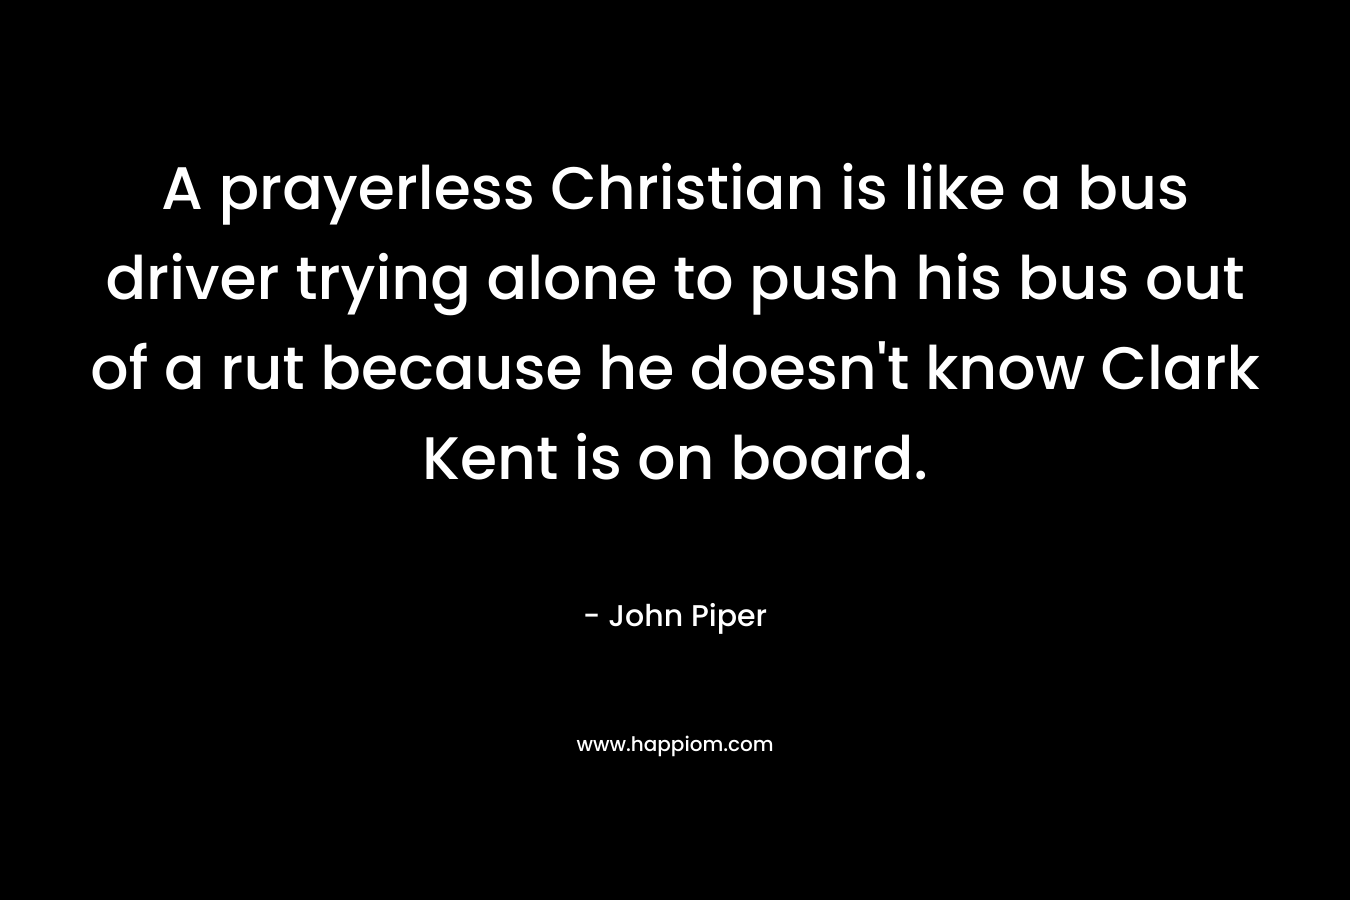 A prayerless Christian is like a bus driver trying alone to push his bus out of a rut because he doesn’t know Clark Kent is on board. – John Piper